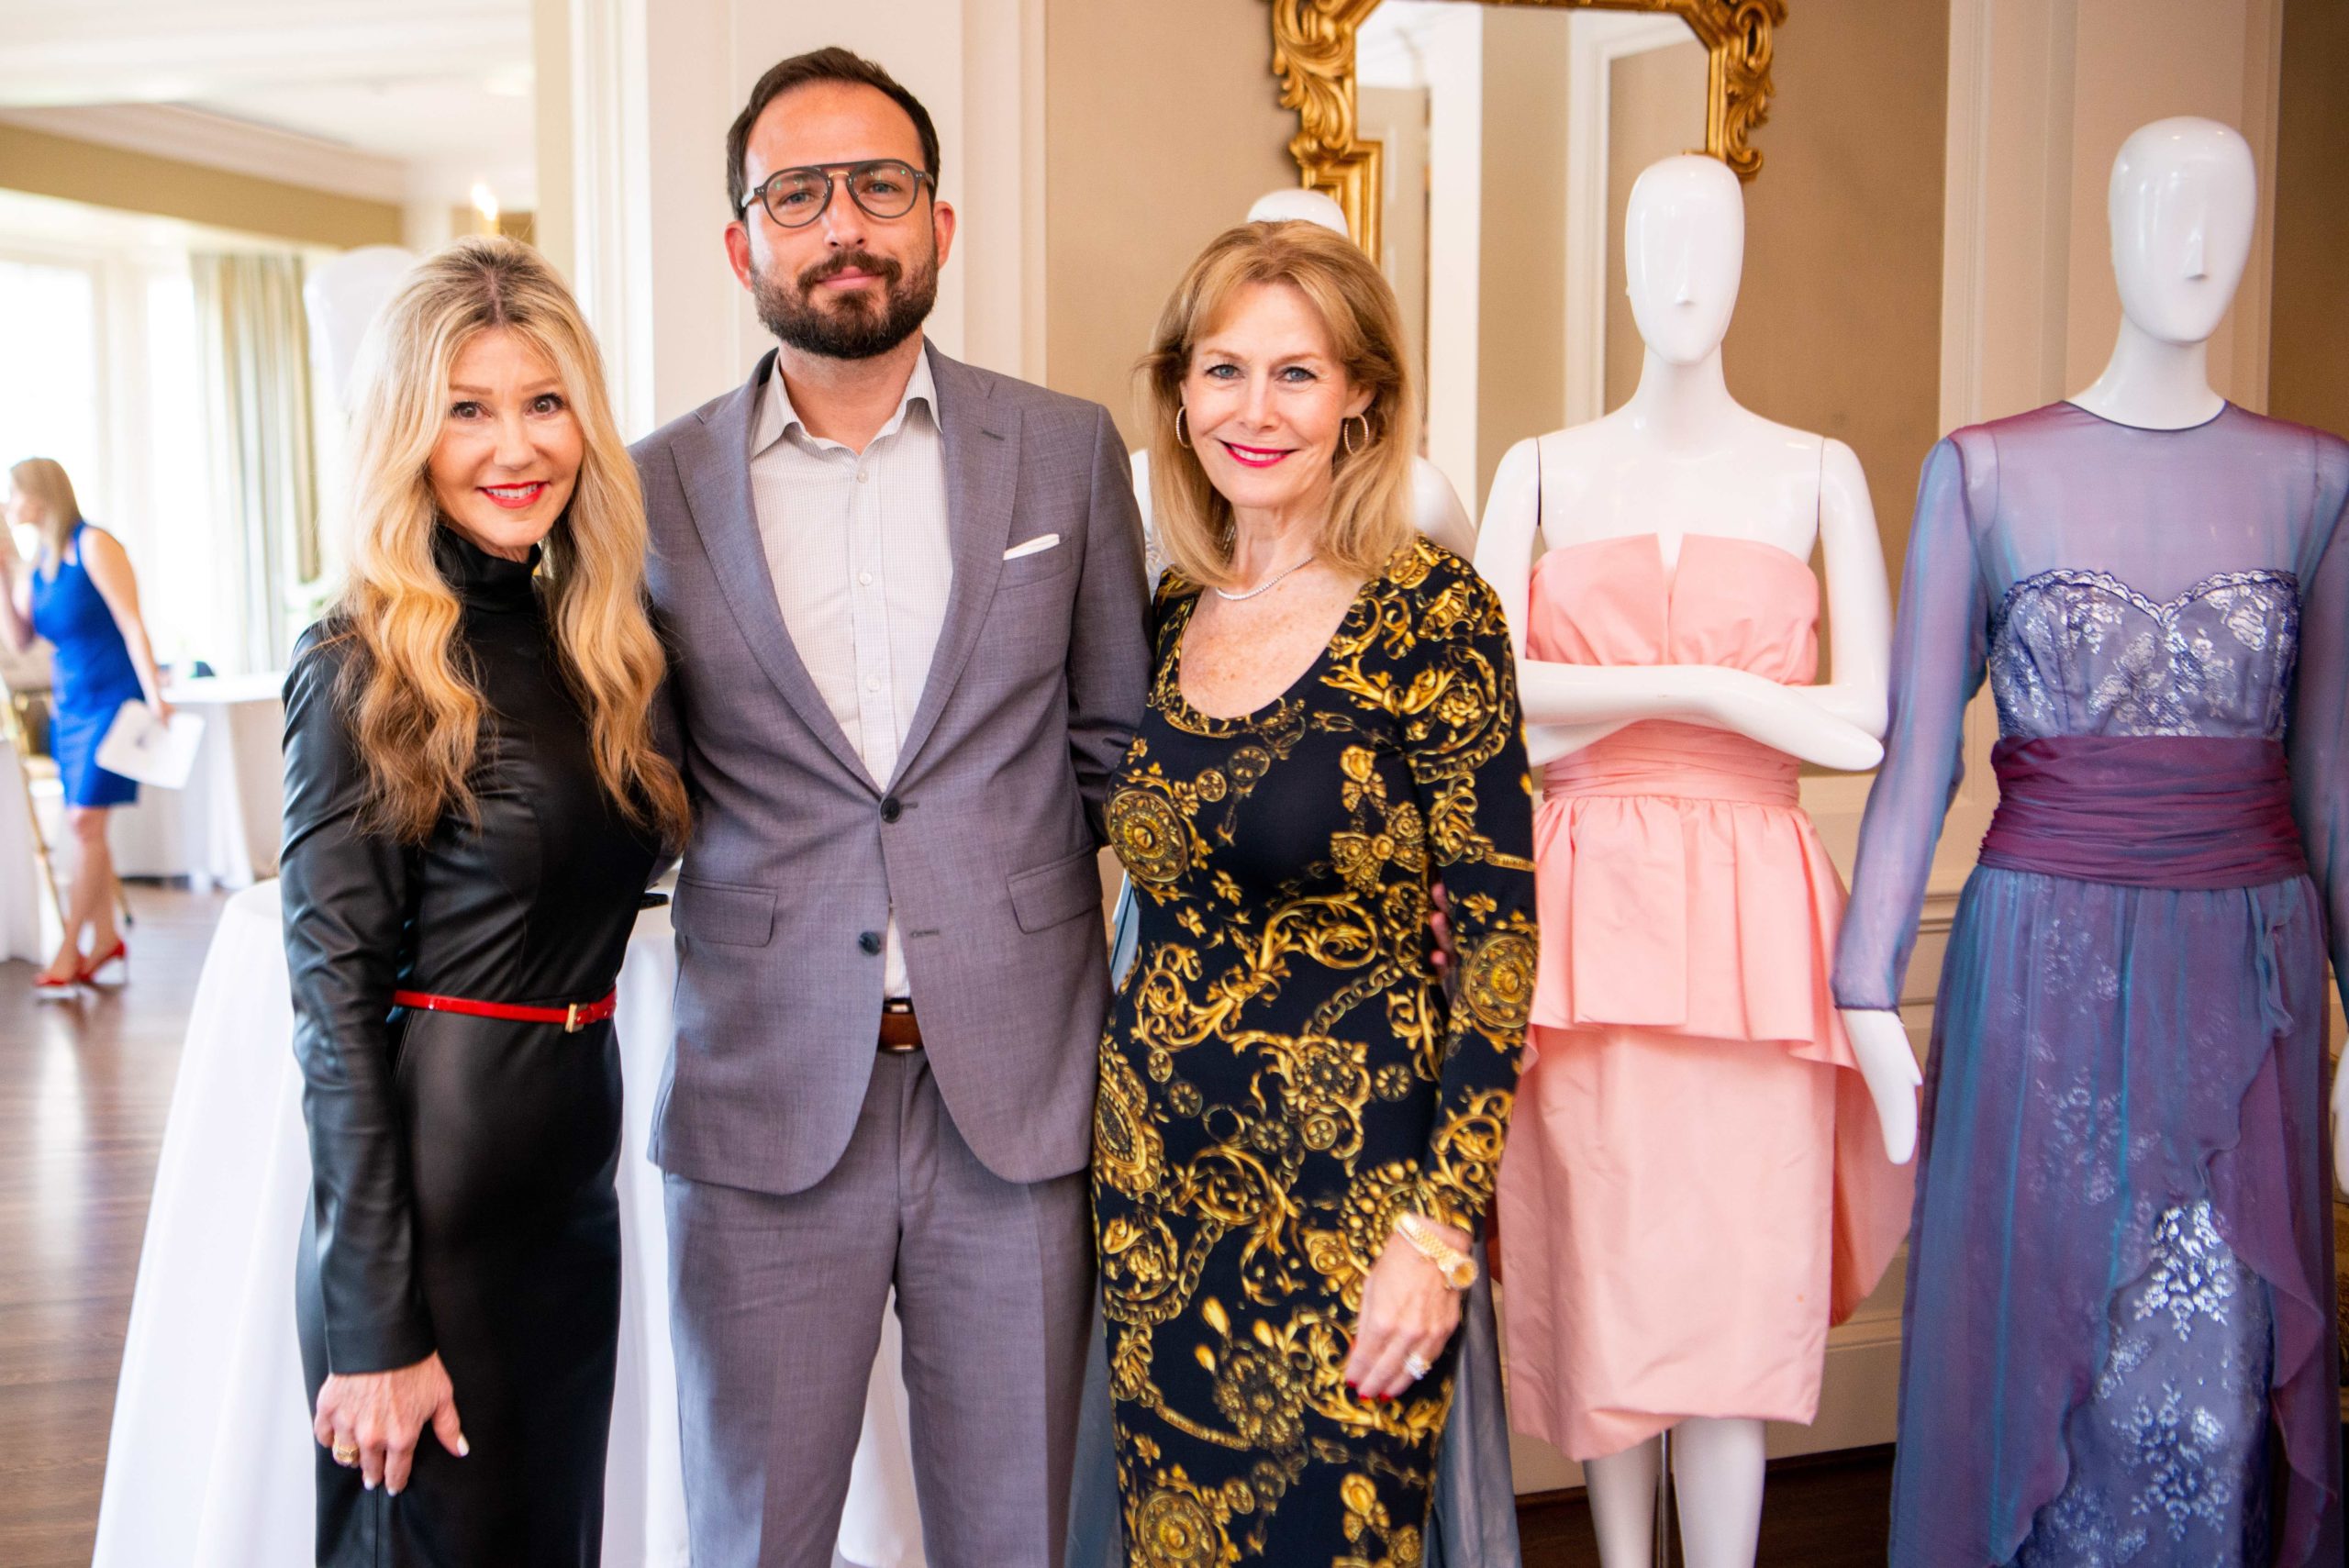 The Sweet Life – “La Dolce Vita” Luncheon & Fashion Show Showcased Italian Culture at its Finest for Italian Cultural & Community Center